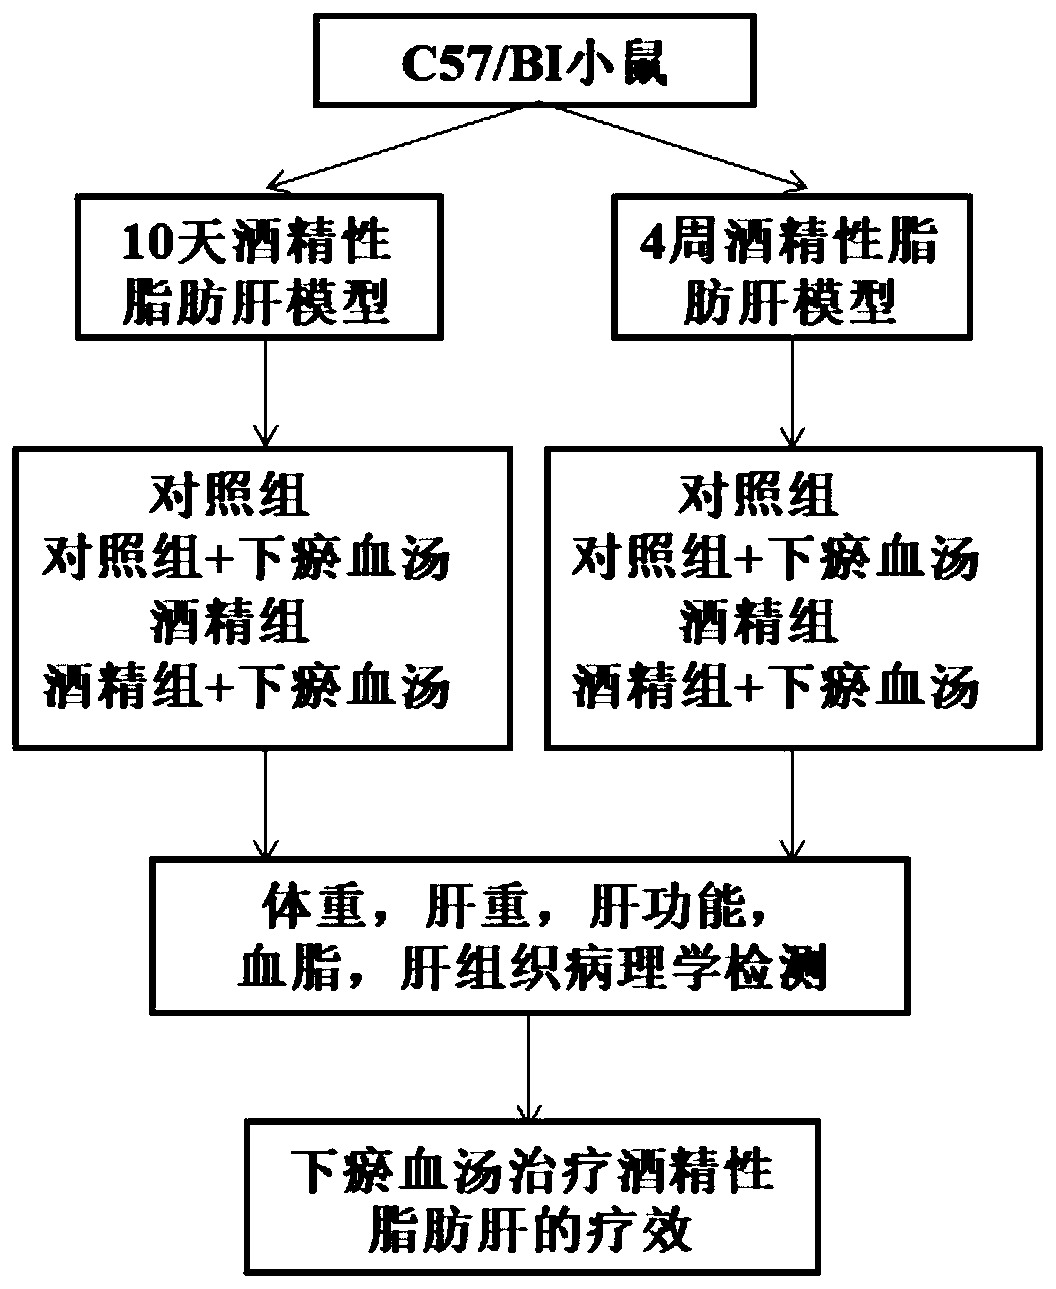 Application of traditional Chinese medicine composition in preparing medicine capable of treating chronic alcoholic steatohepatitis